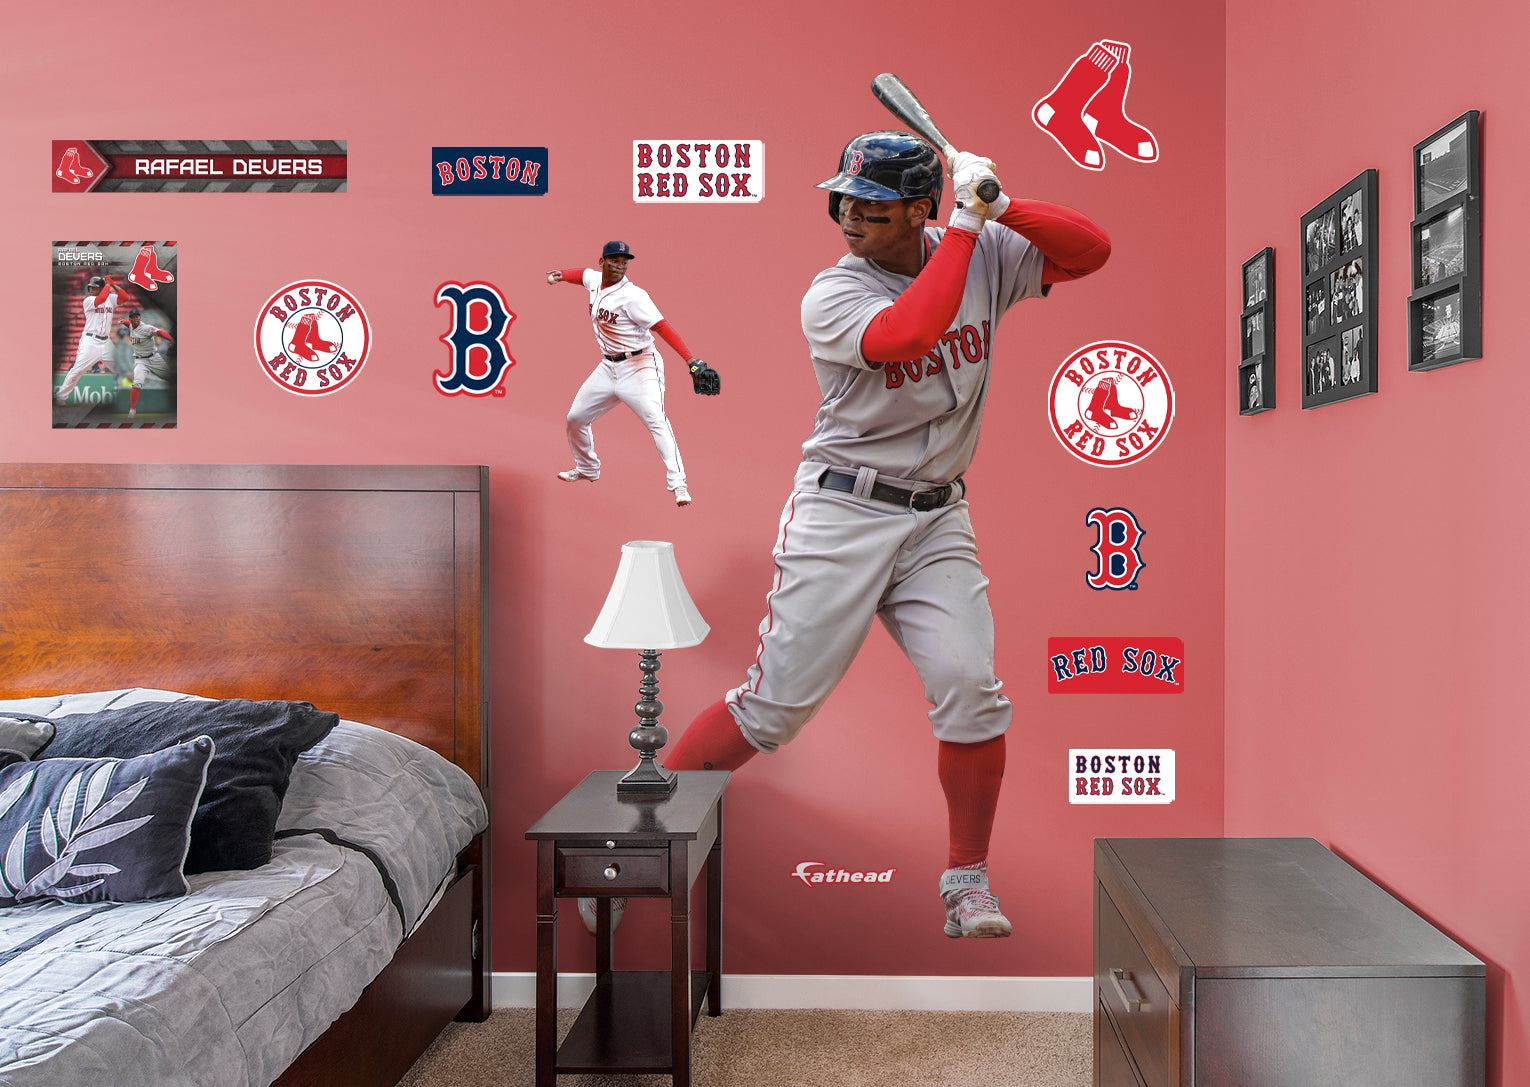 Boston Red Sox: Rafael Devers 2021 - MLB Removable Wall Adhesive Wall Decal Giant Athlete +2 Wall Decals 31W x 50H